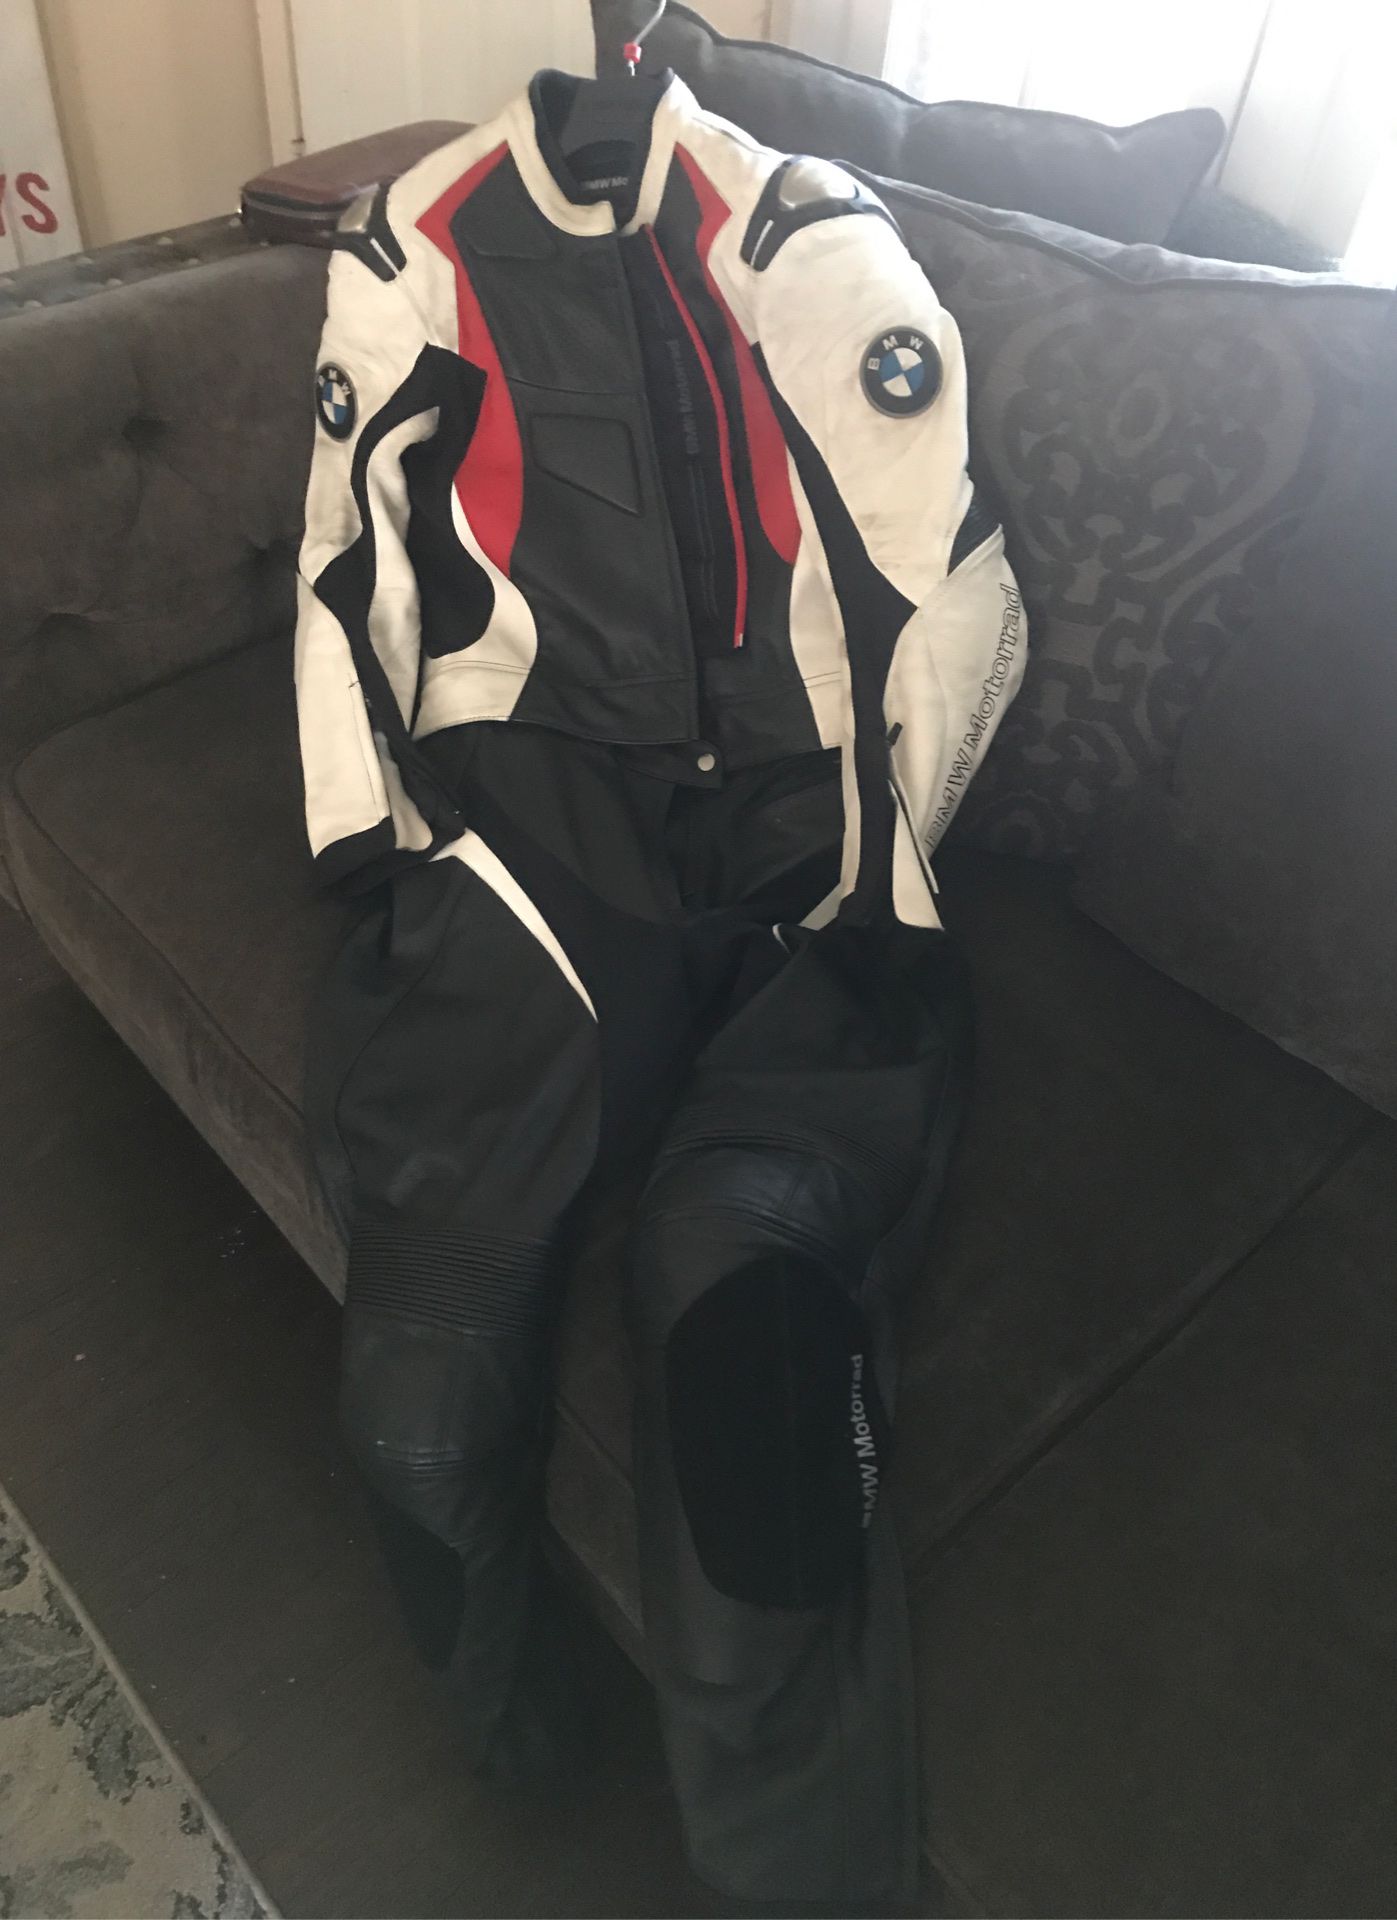 BMW Race suit pants and jacket included